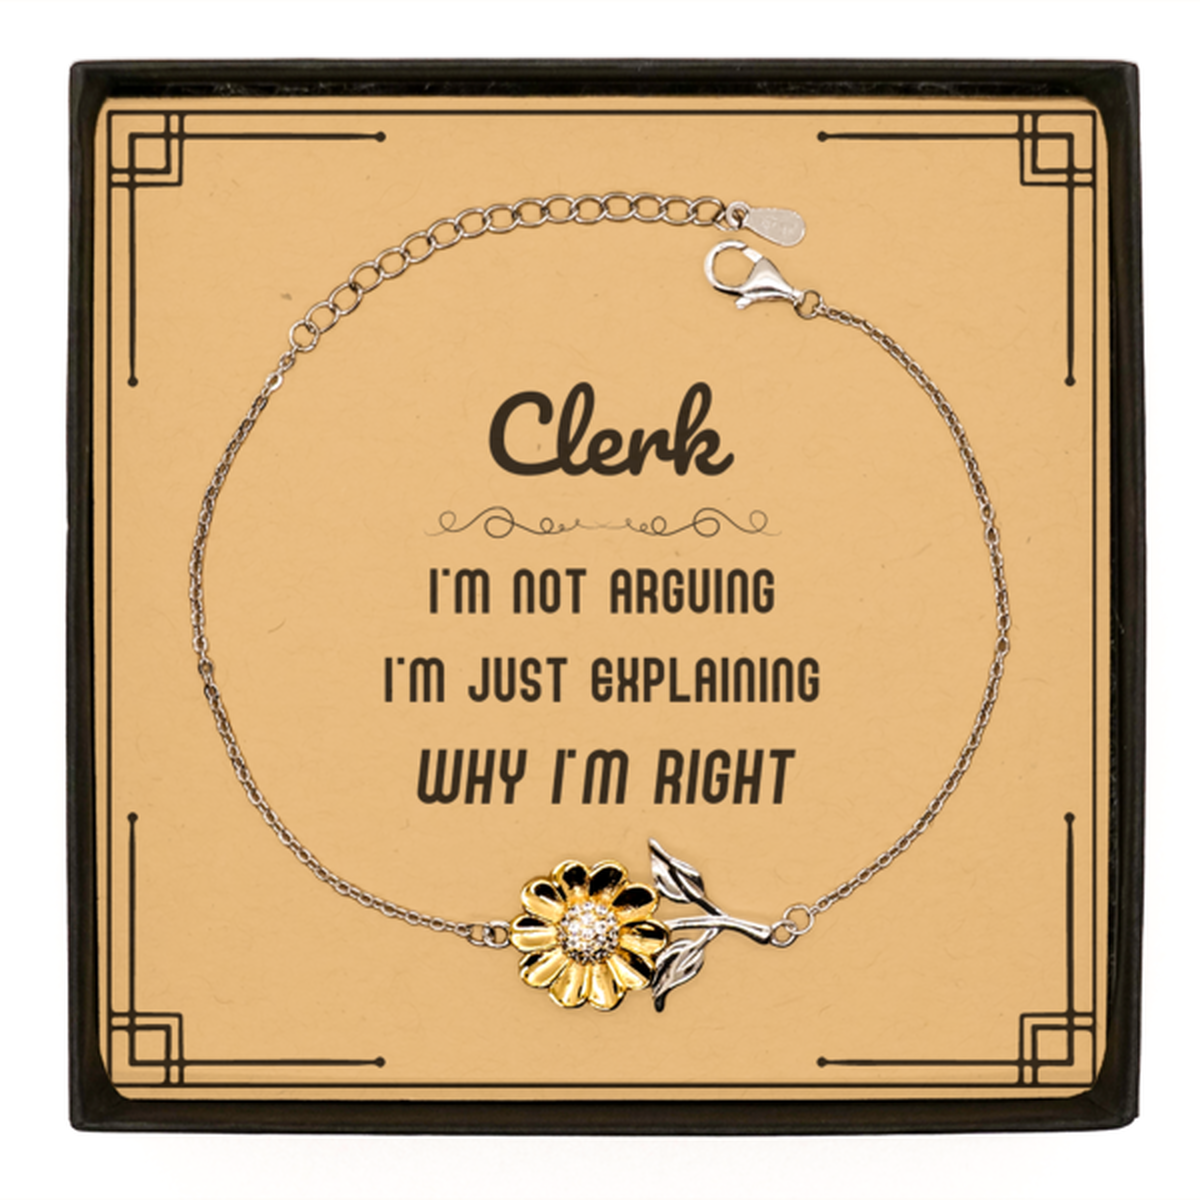 Clerk I'm not Arguing. I'm Just Explaining Why I'm RIGHT Sunflower Bracelet, Funny Saying Quote Clerk Gifts For Clerk Message Card Graduation Birthday Christmas Gifts for Men Women Coworker